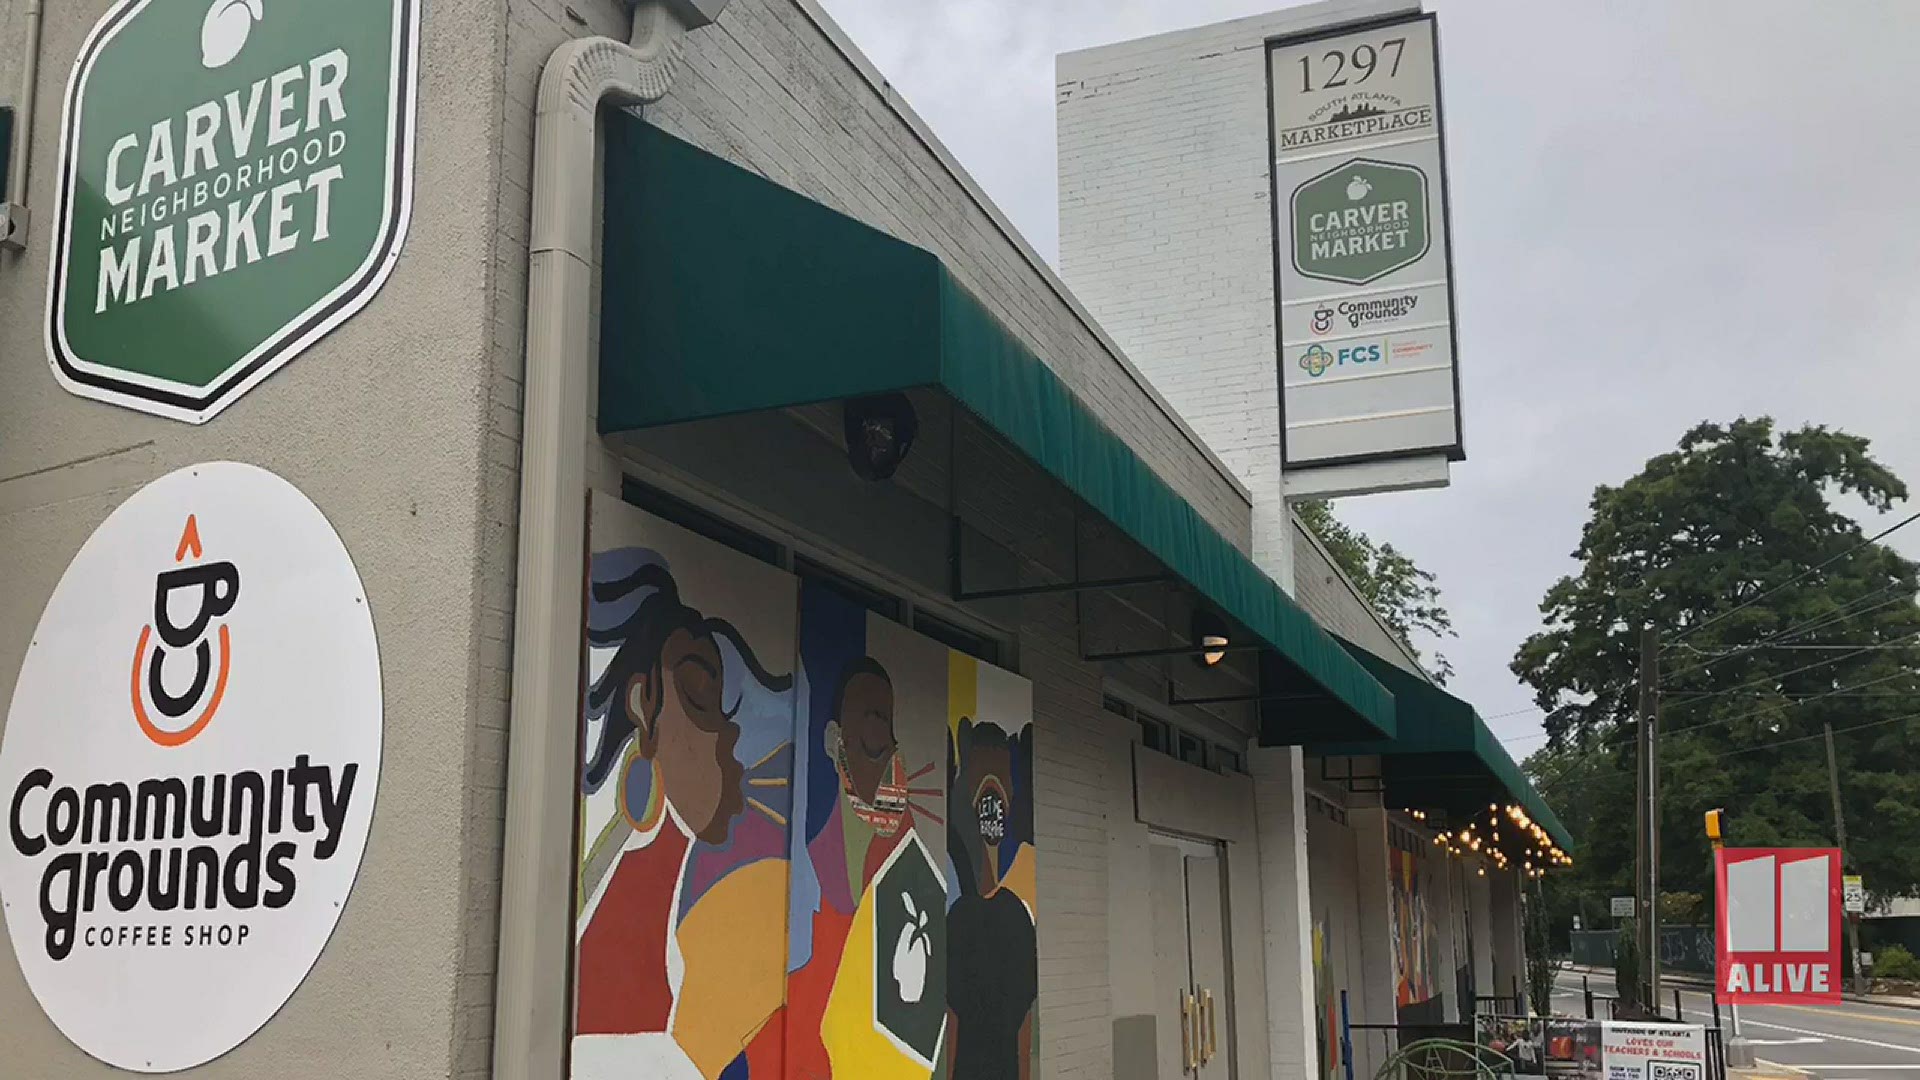 After being vandalized, this neighborhood's only grocery store, The Carver Market, is painting a mural on the plywood and the neighbors are helping.